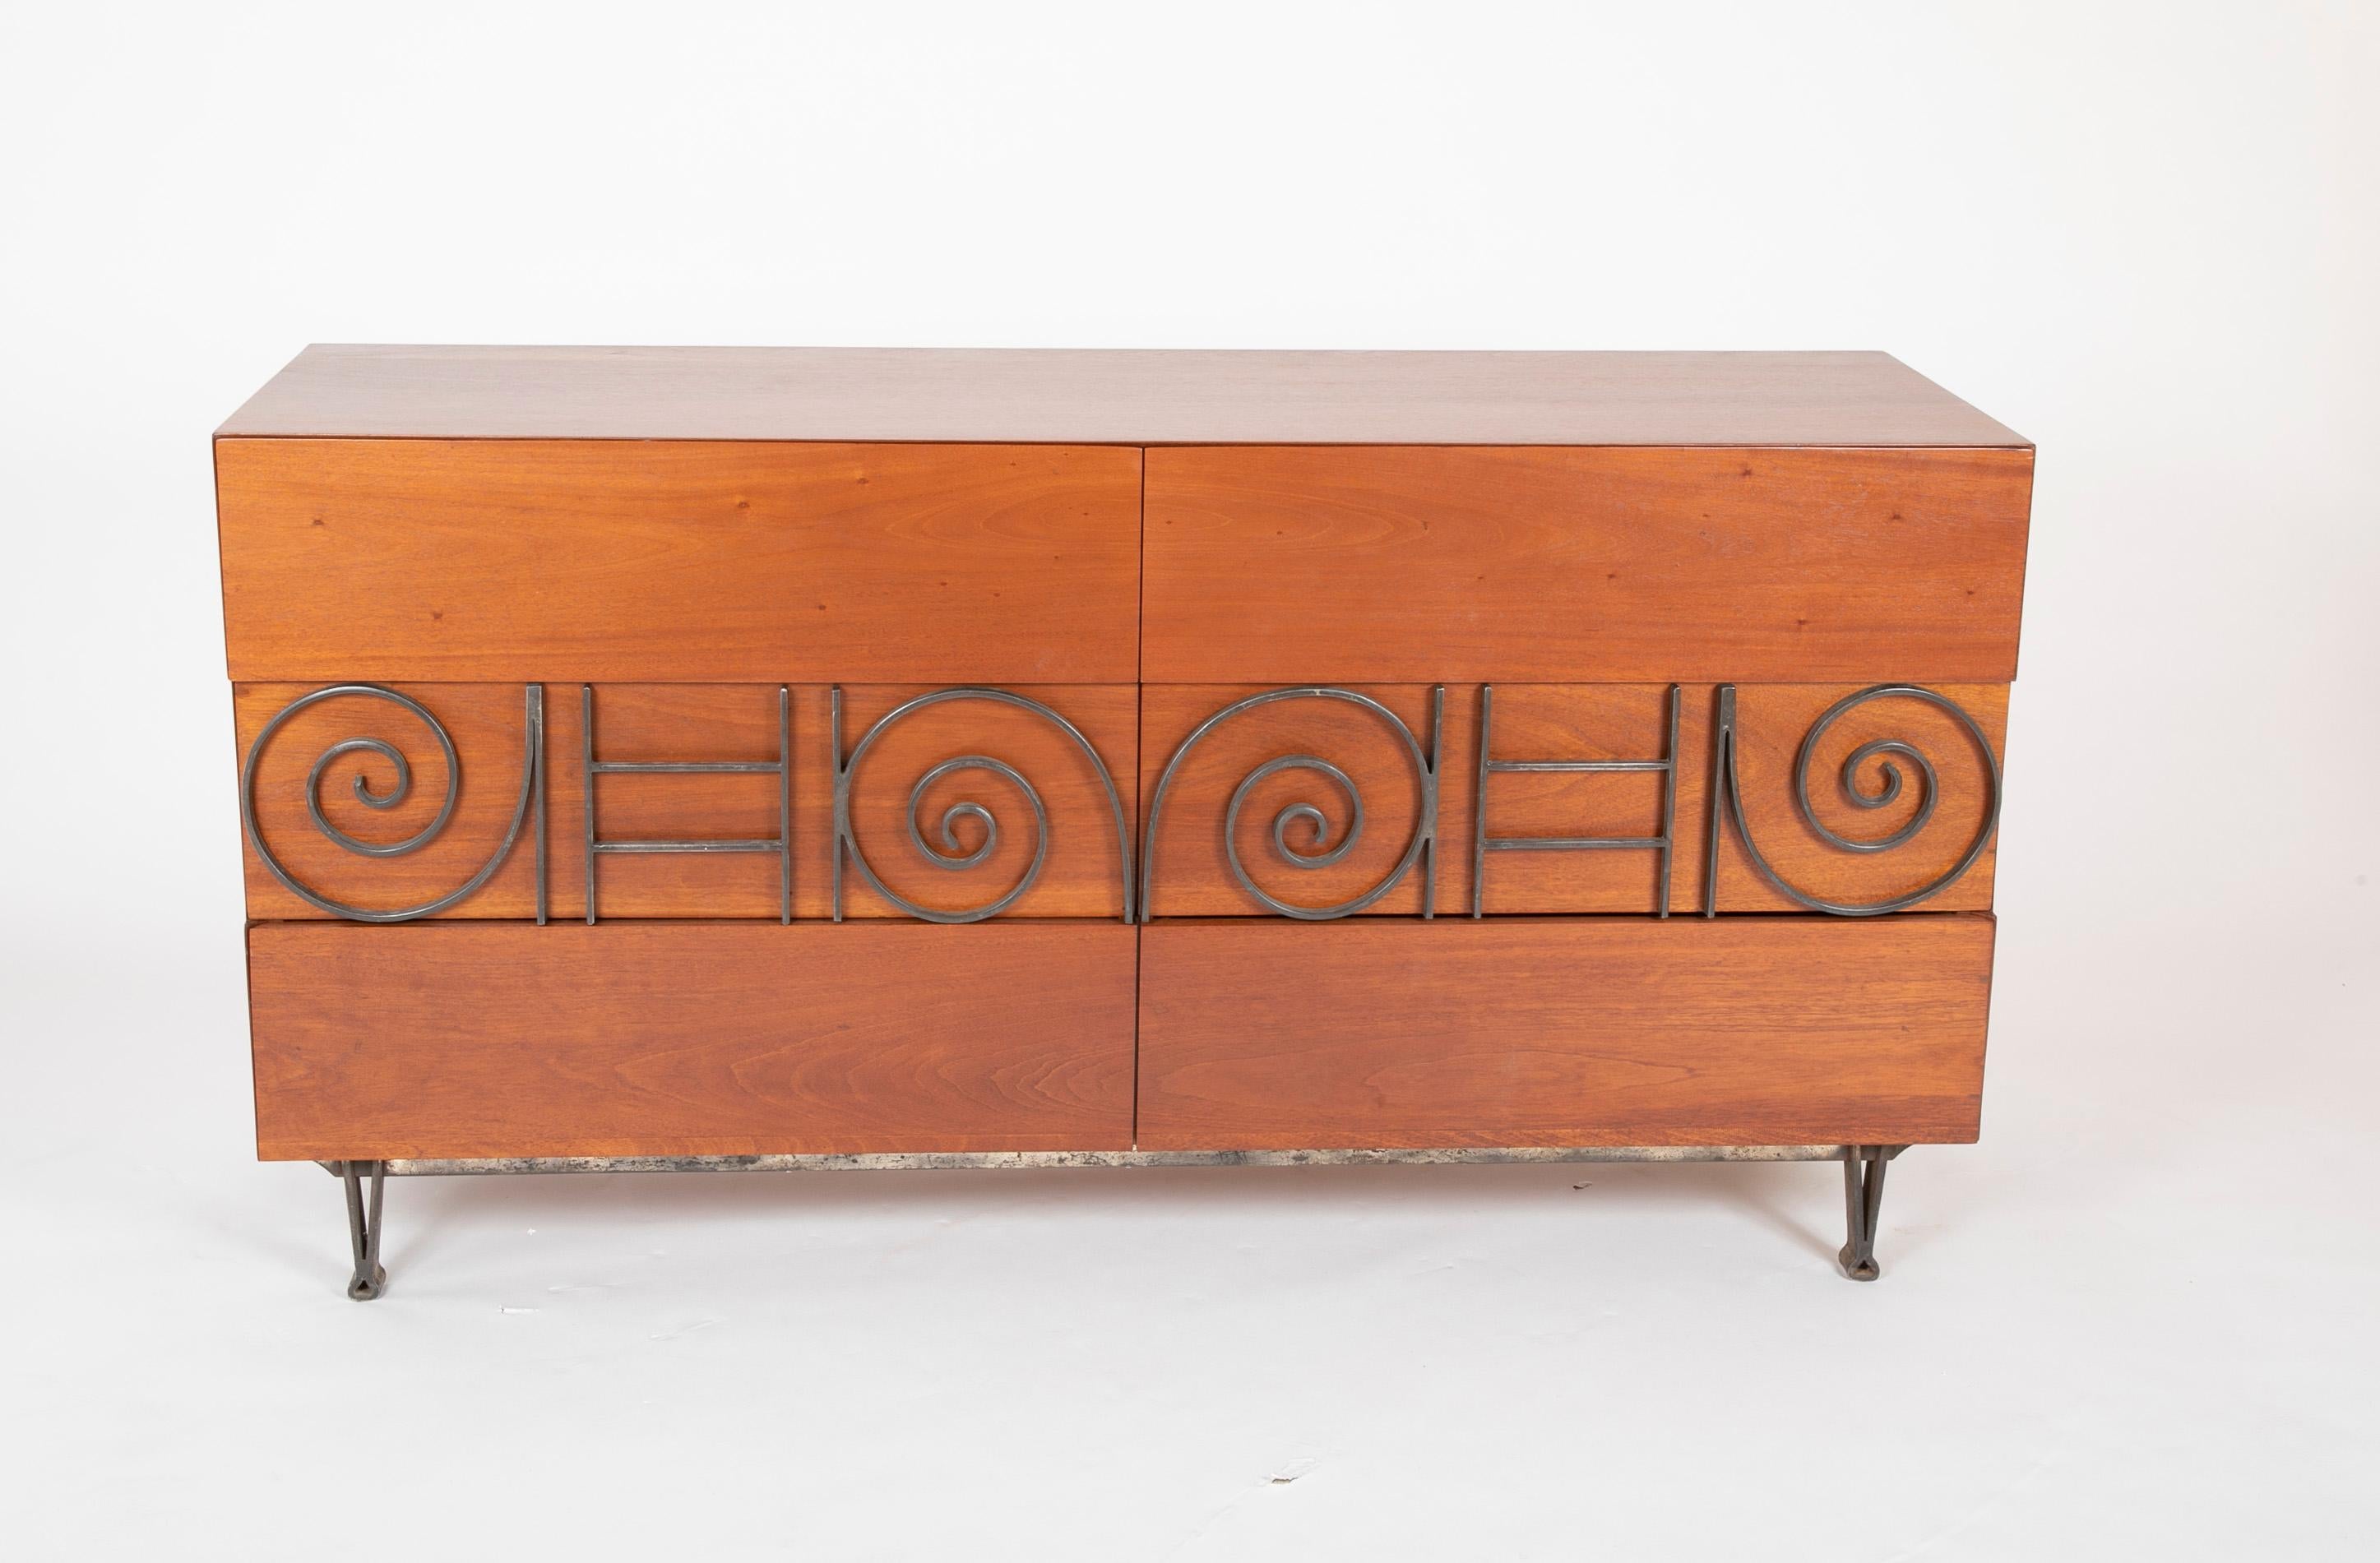 Mexican Walnut and Brass Credenza Designed by Edmund Spence, circa 1955